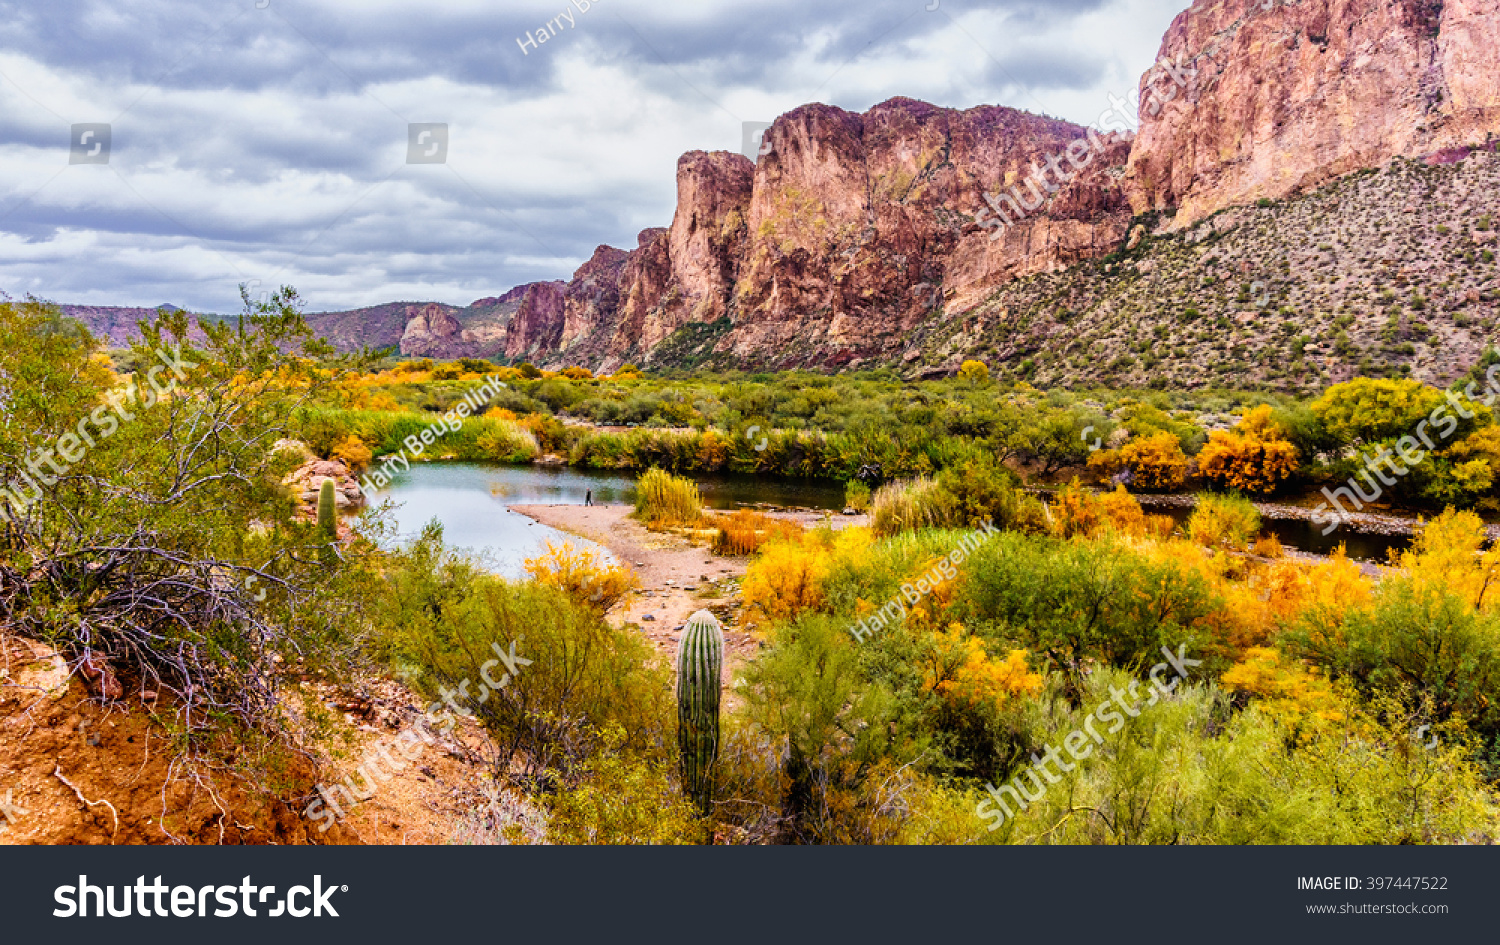 The Salt River and surrounding Mountains in the state of Arizona with fall colored shrubs and trees #397447522